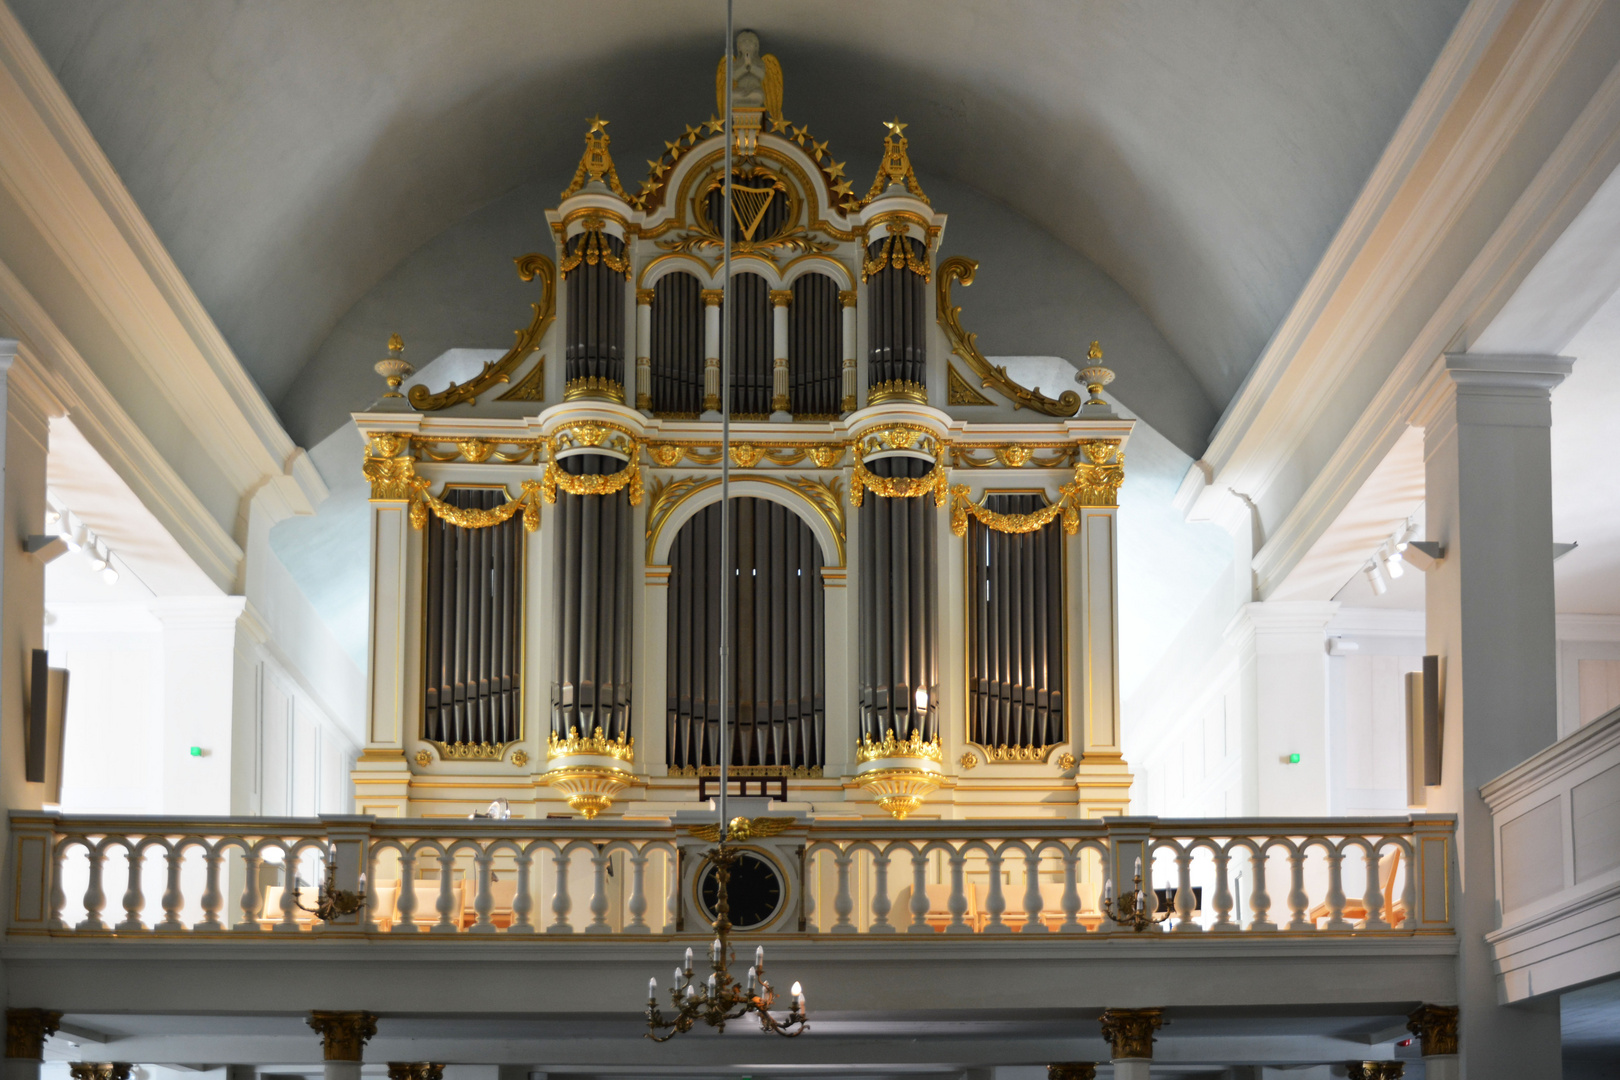 The orgel of Old church 